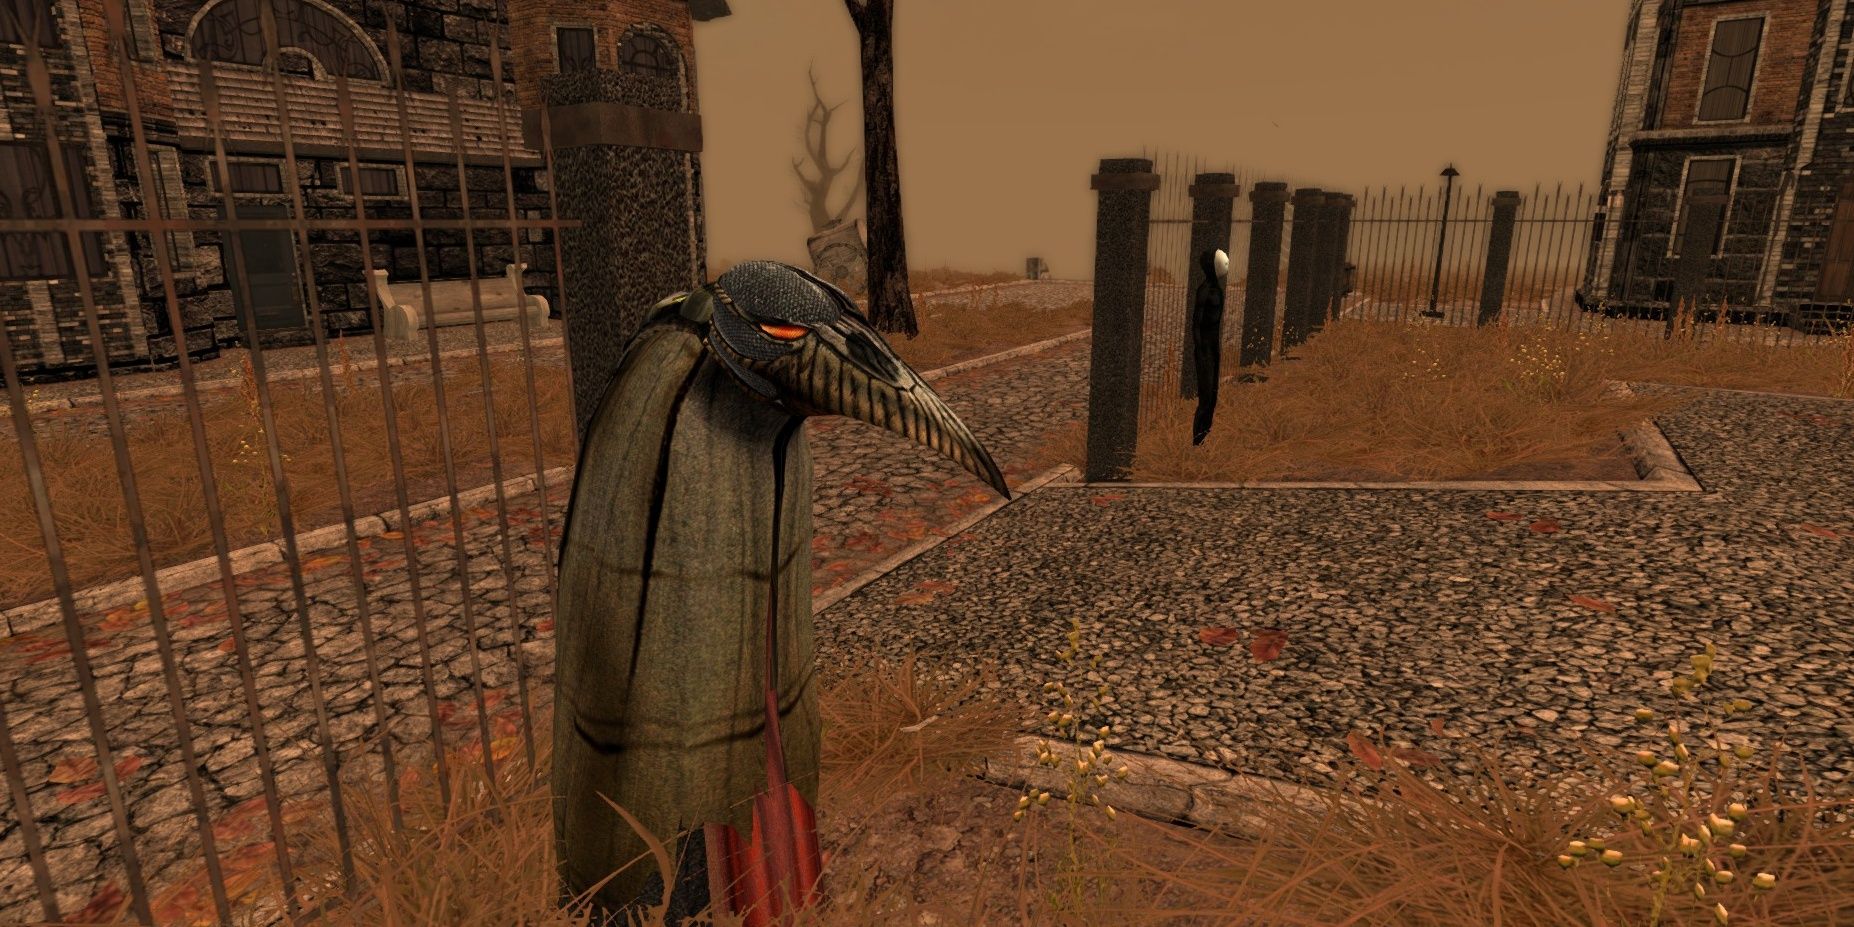 A creature standing by a fence wearing a bird mask in Pathologic